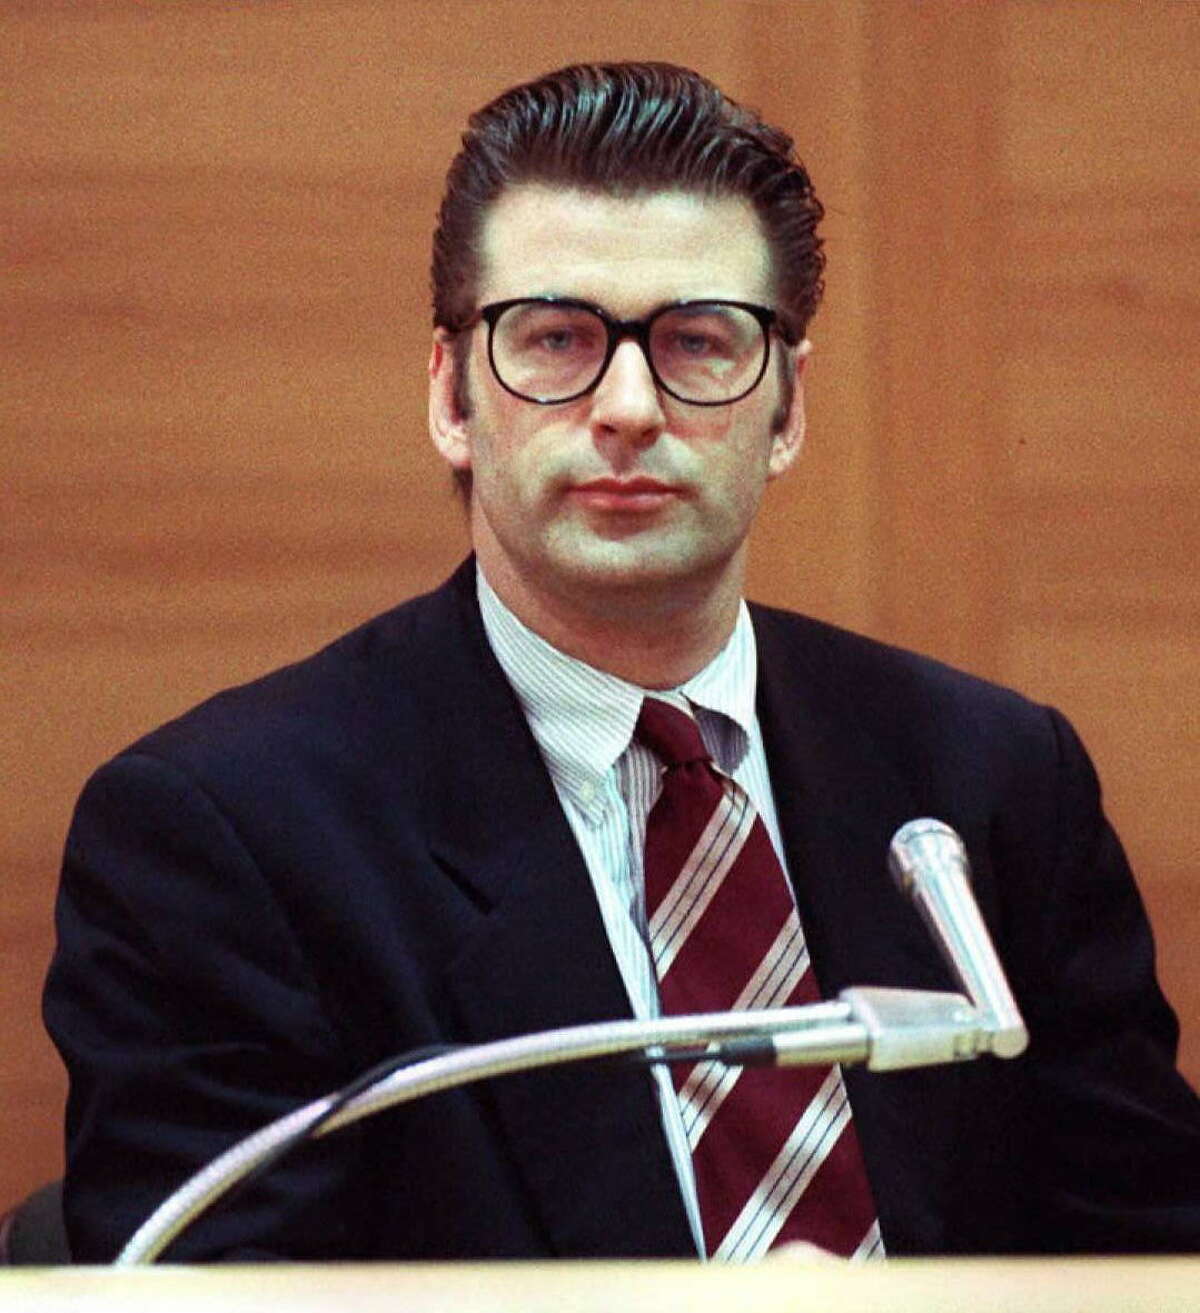 Alec Baldwin in some hipster glasses back in 1996, when he took the stand at his misdemeanor assault trial in California. Baldwin, accused of hitting a photographer, was acquitted.